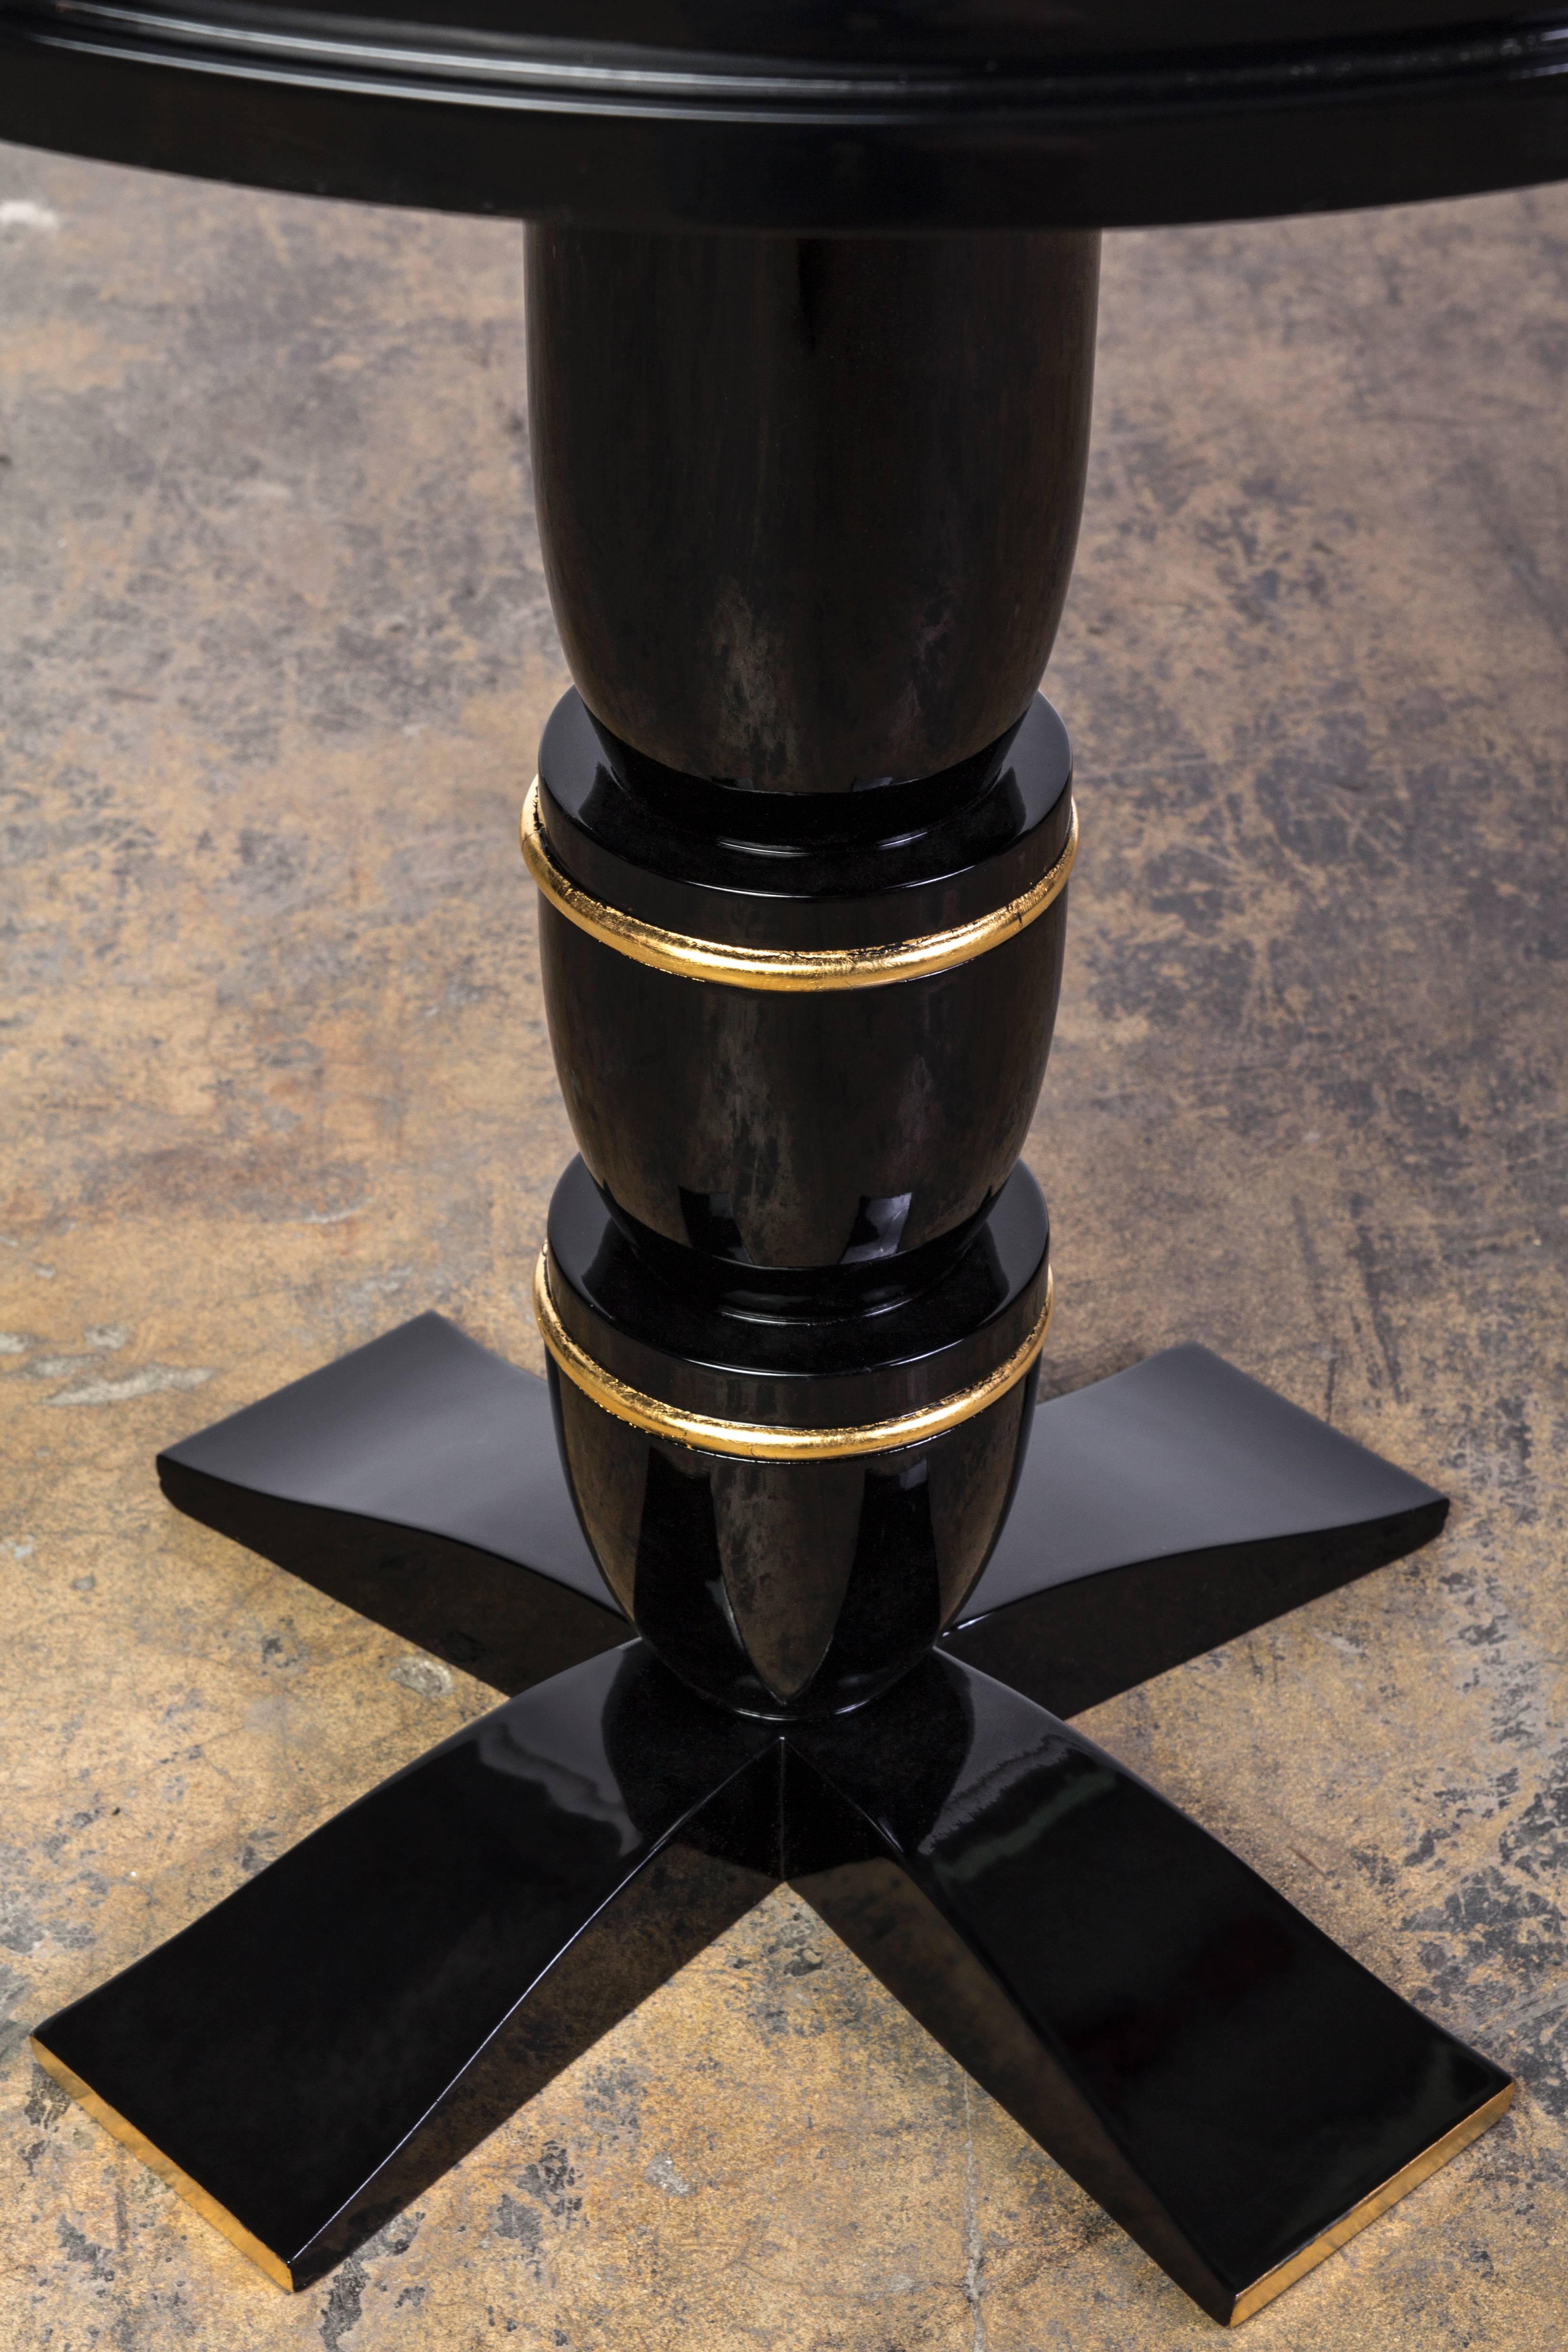 This unique Art Deco side / center table features a unique geometric design in red lacquer and gold leaf top, black lacquer finishing and gold leaf details.